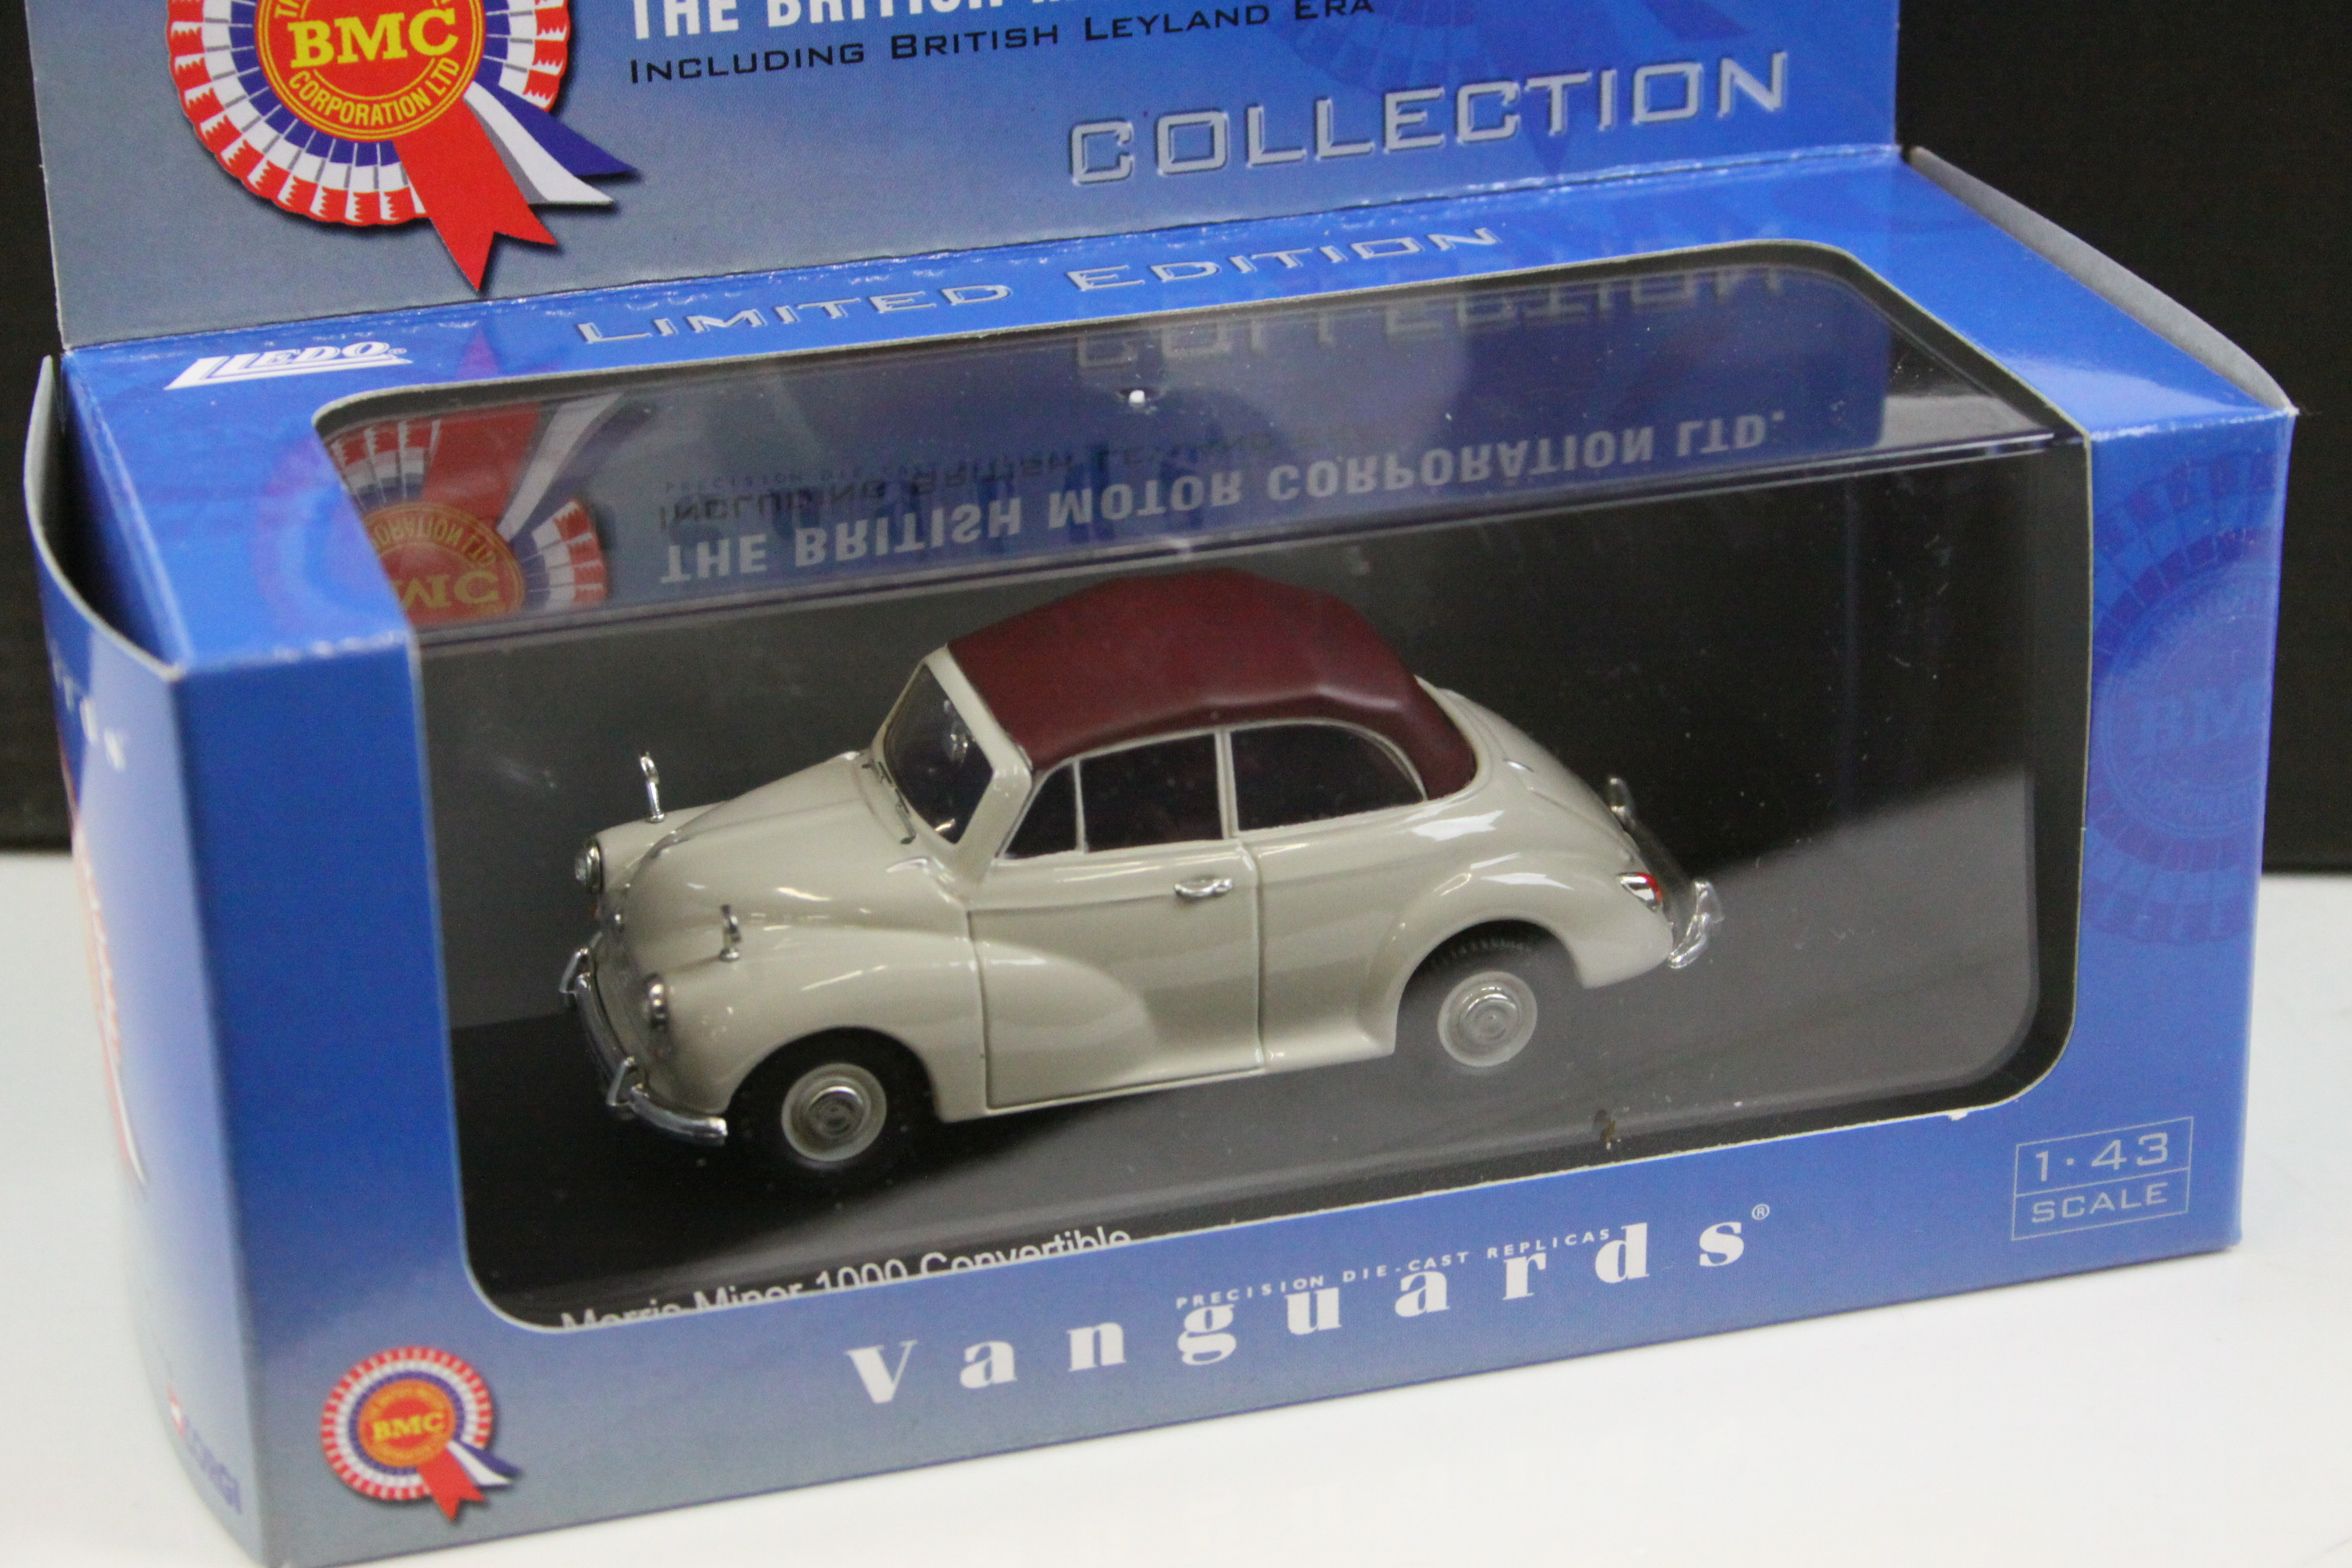 19 boxed 1:43 Lledo Vanguards ltd edn diecast collection models to include Vauxhall, Jaguar, Rover - Image 7 of 7